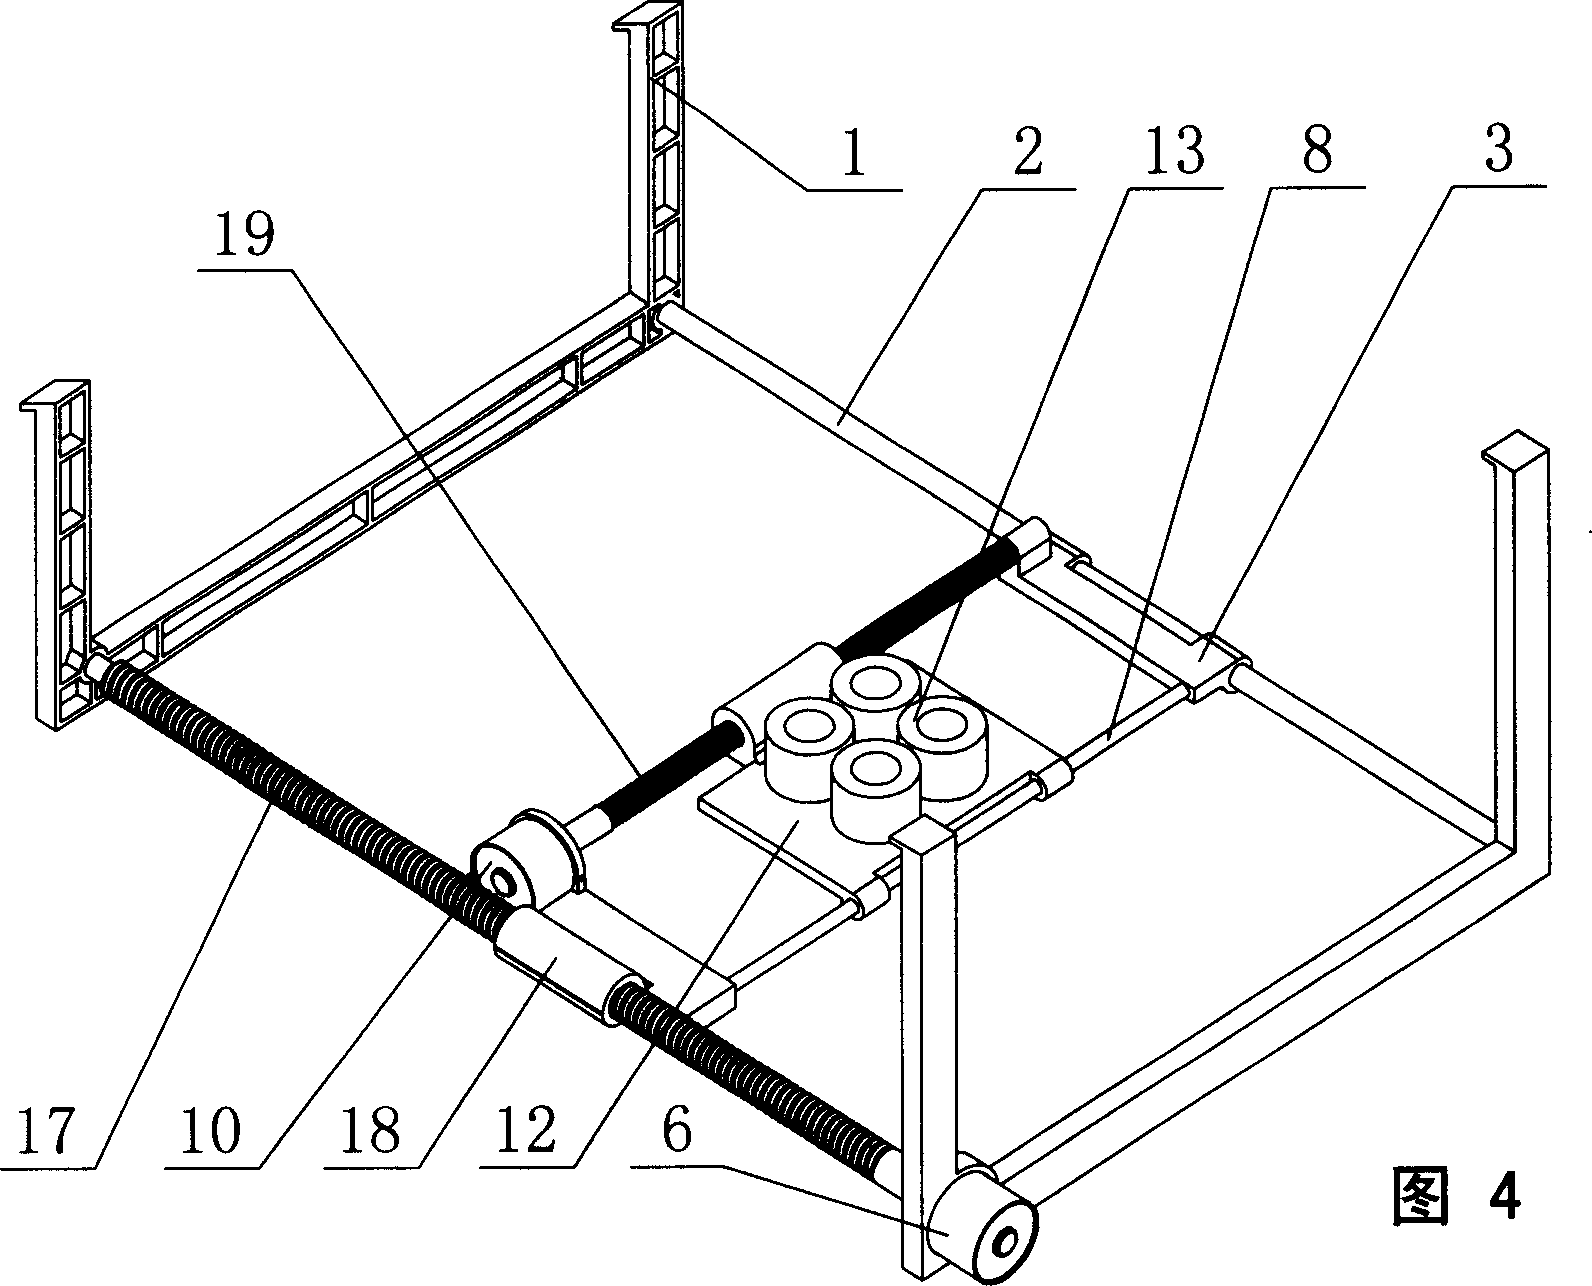 Seal moving device for remote network seal machine